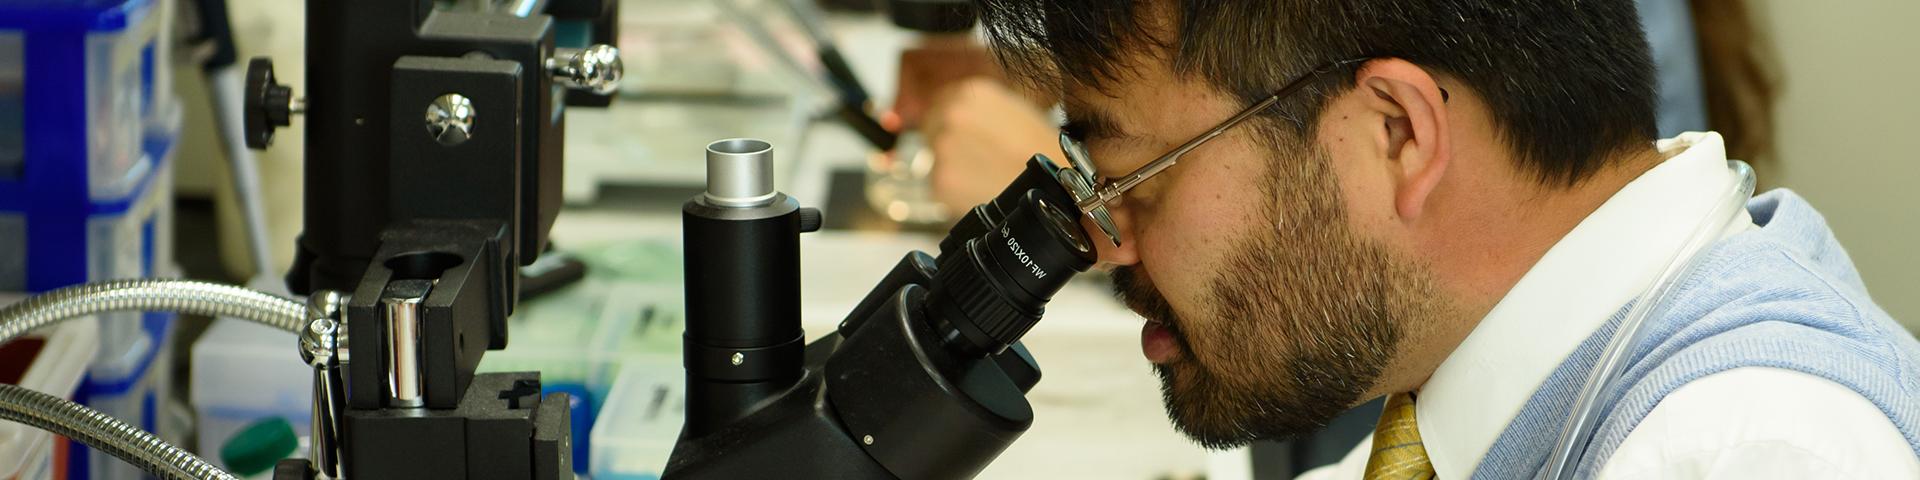 Post doc working in lab looking in microscope